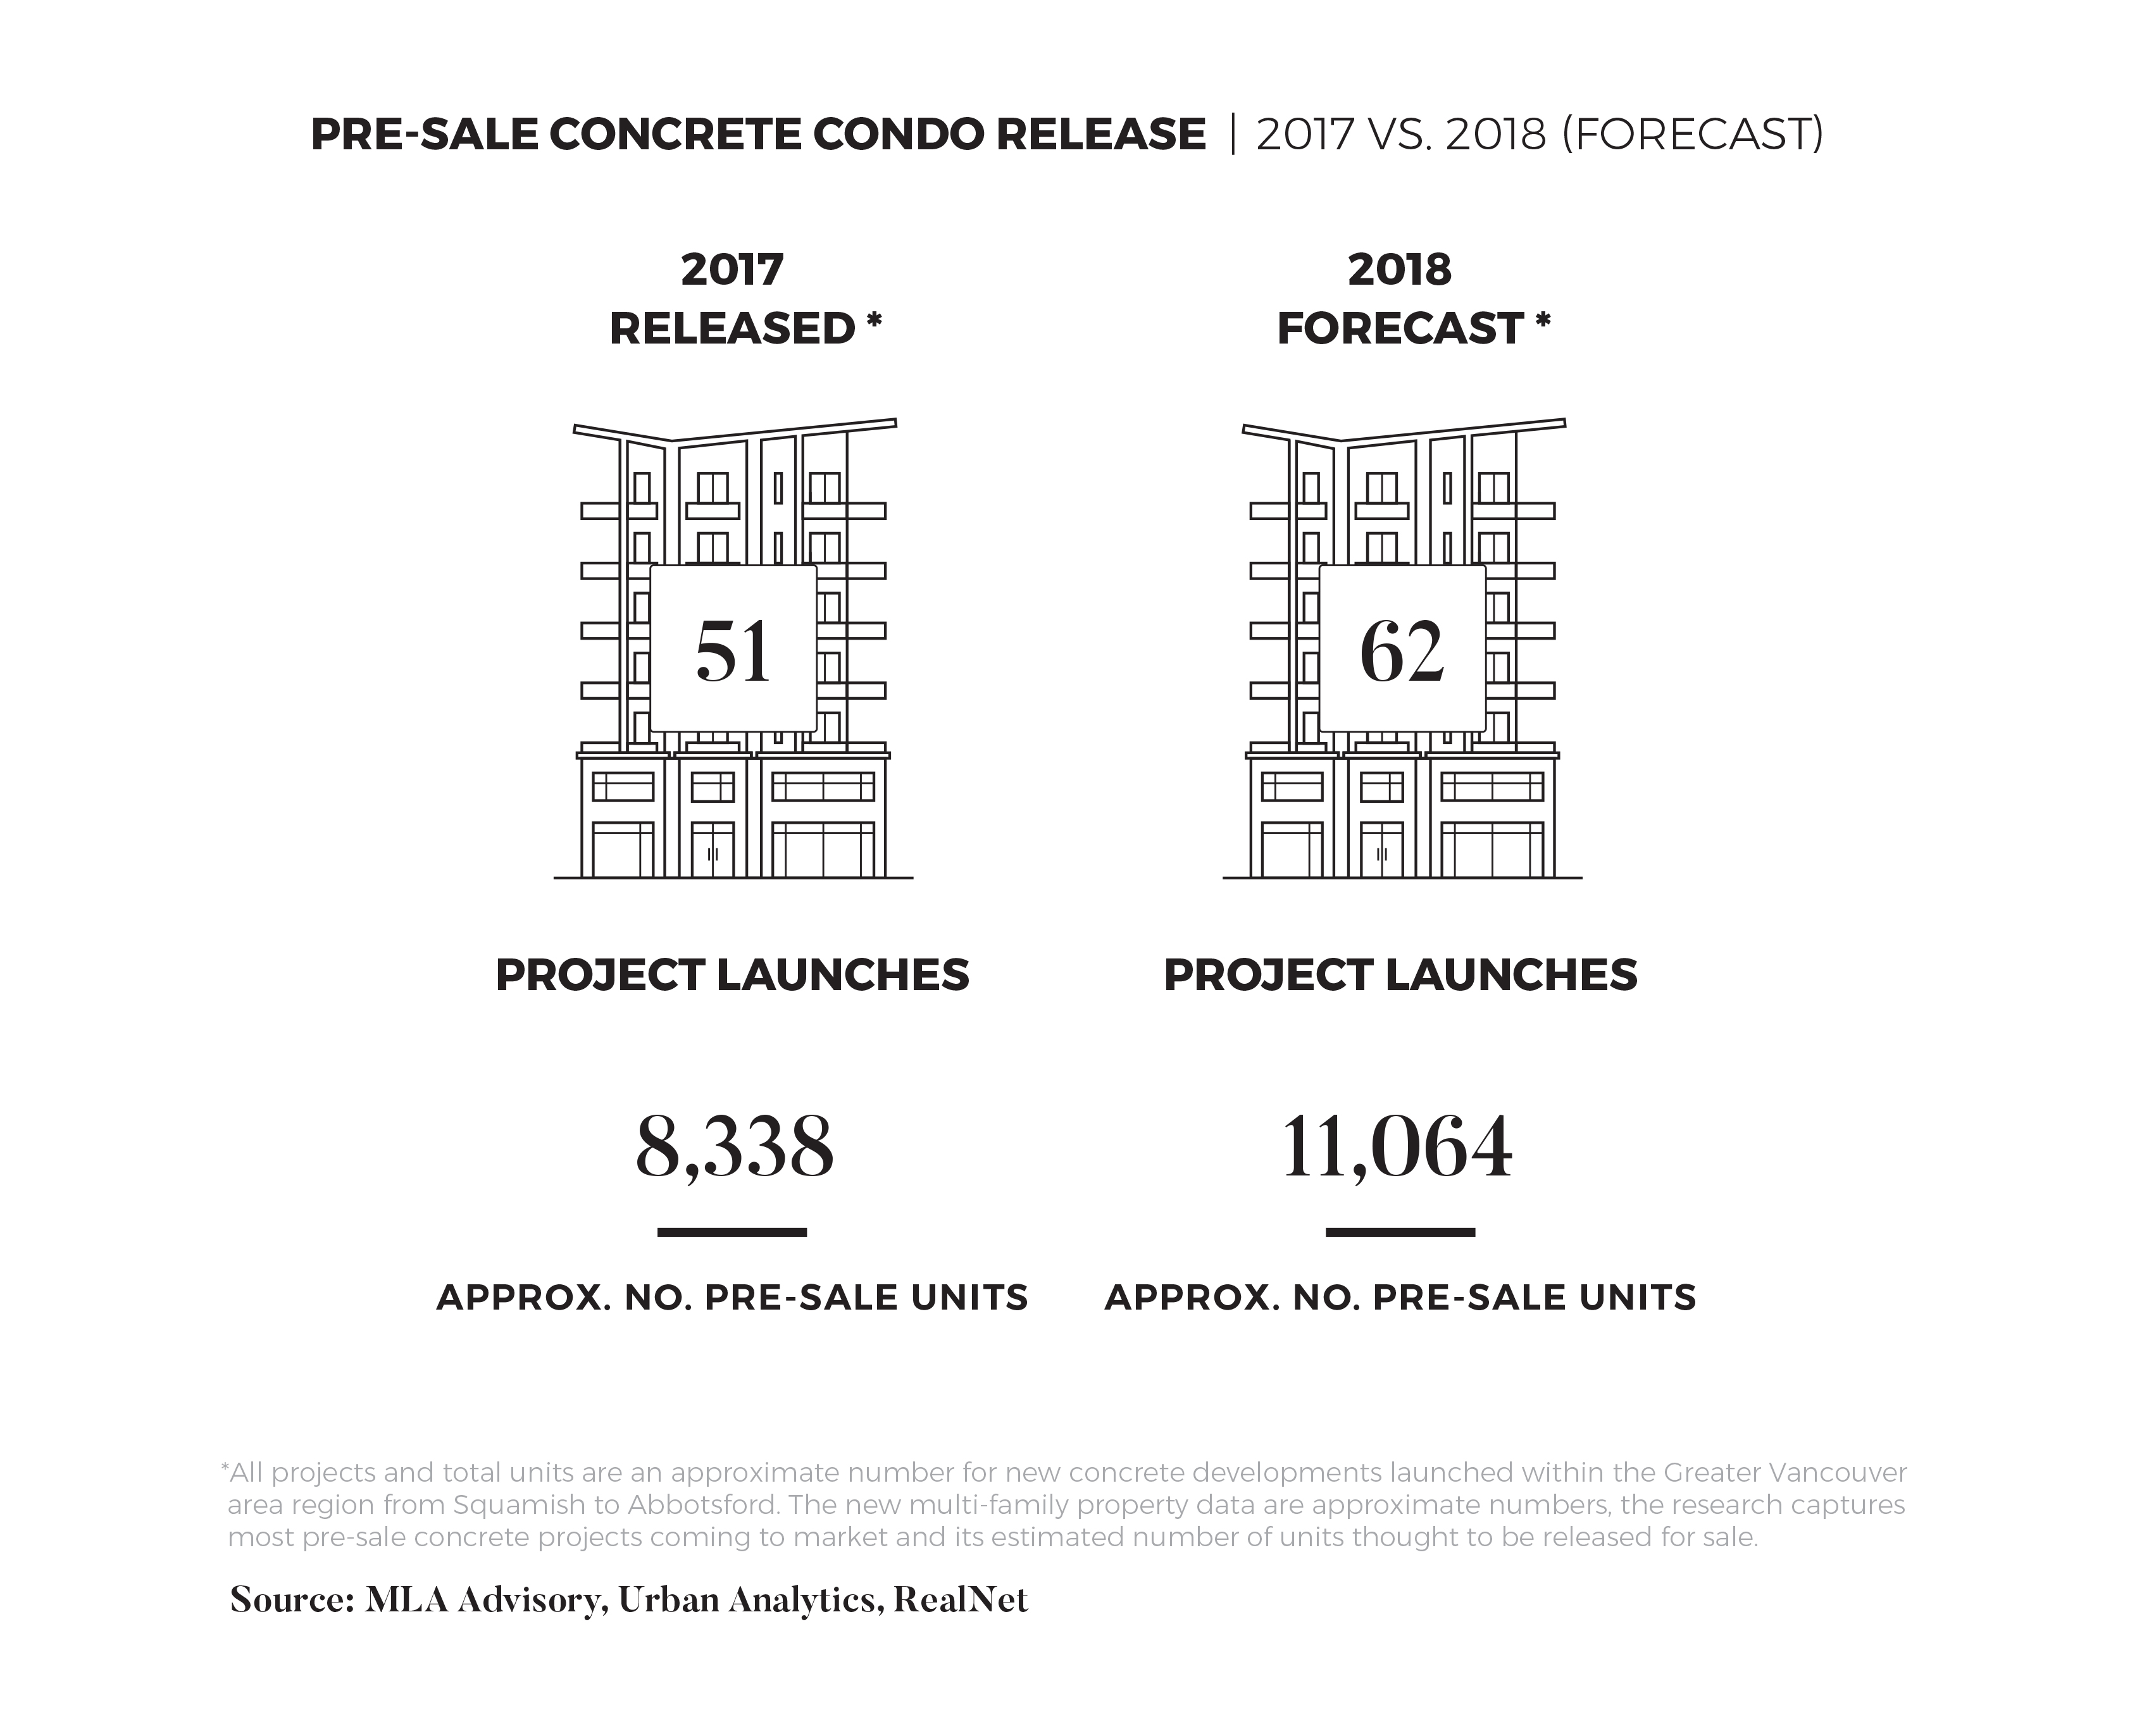 MLA Advisory Market Intel report anticipates more than 11,000 new concrete units in Greater Vancouver for 2018, a 33% increase from last year.